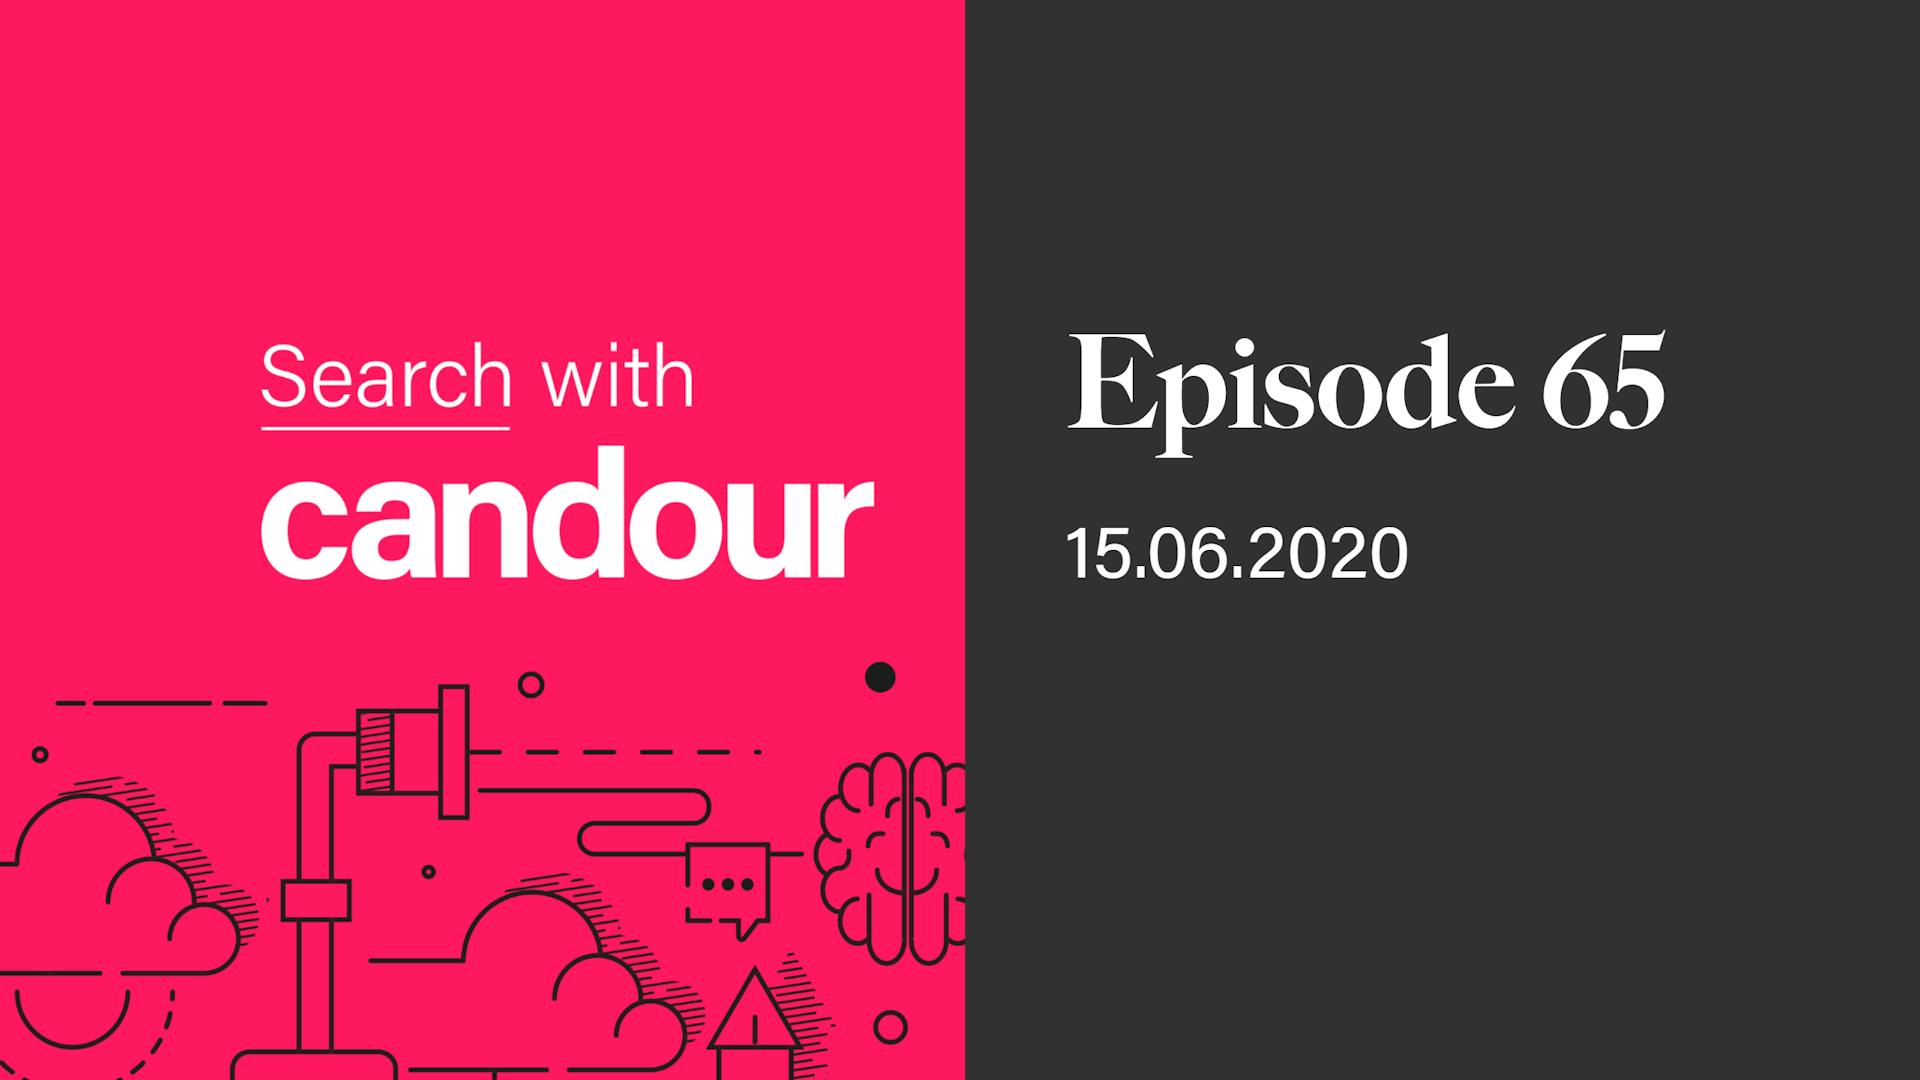 Episode 65 - Search with Candour